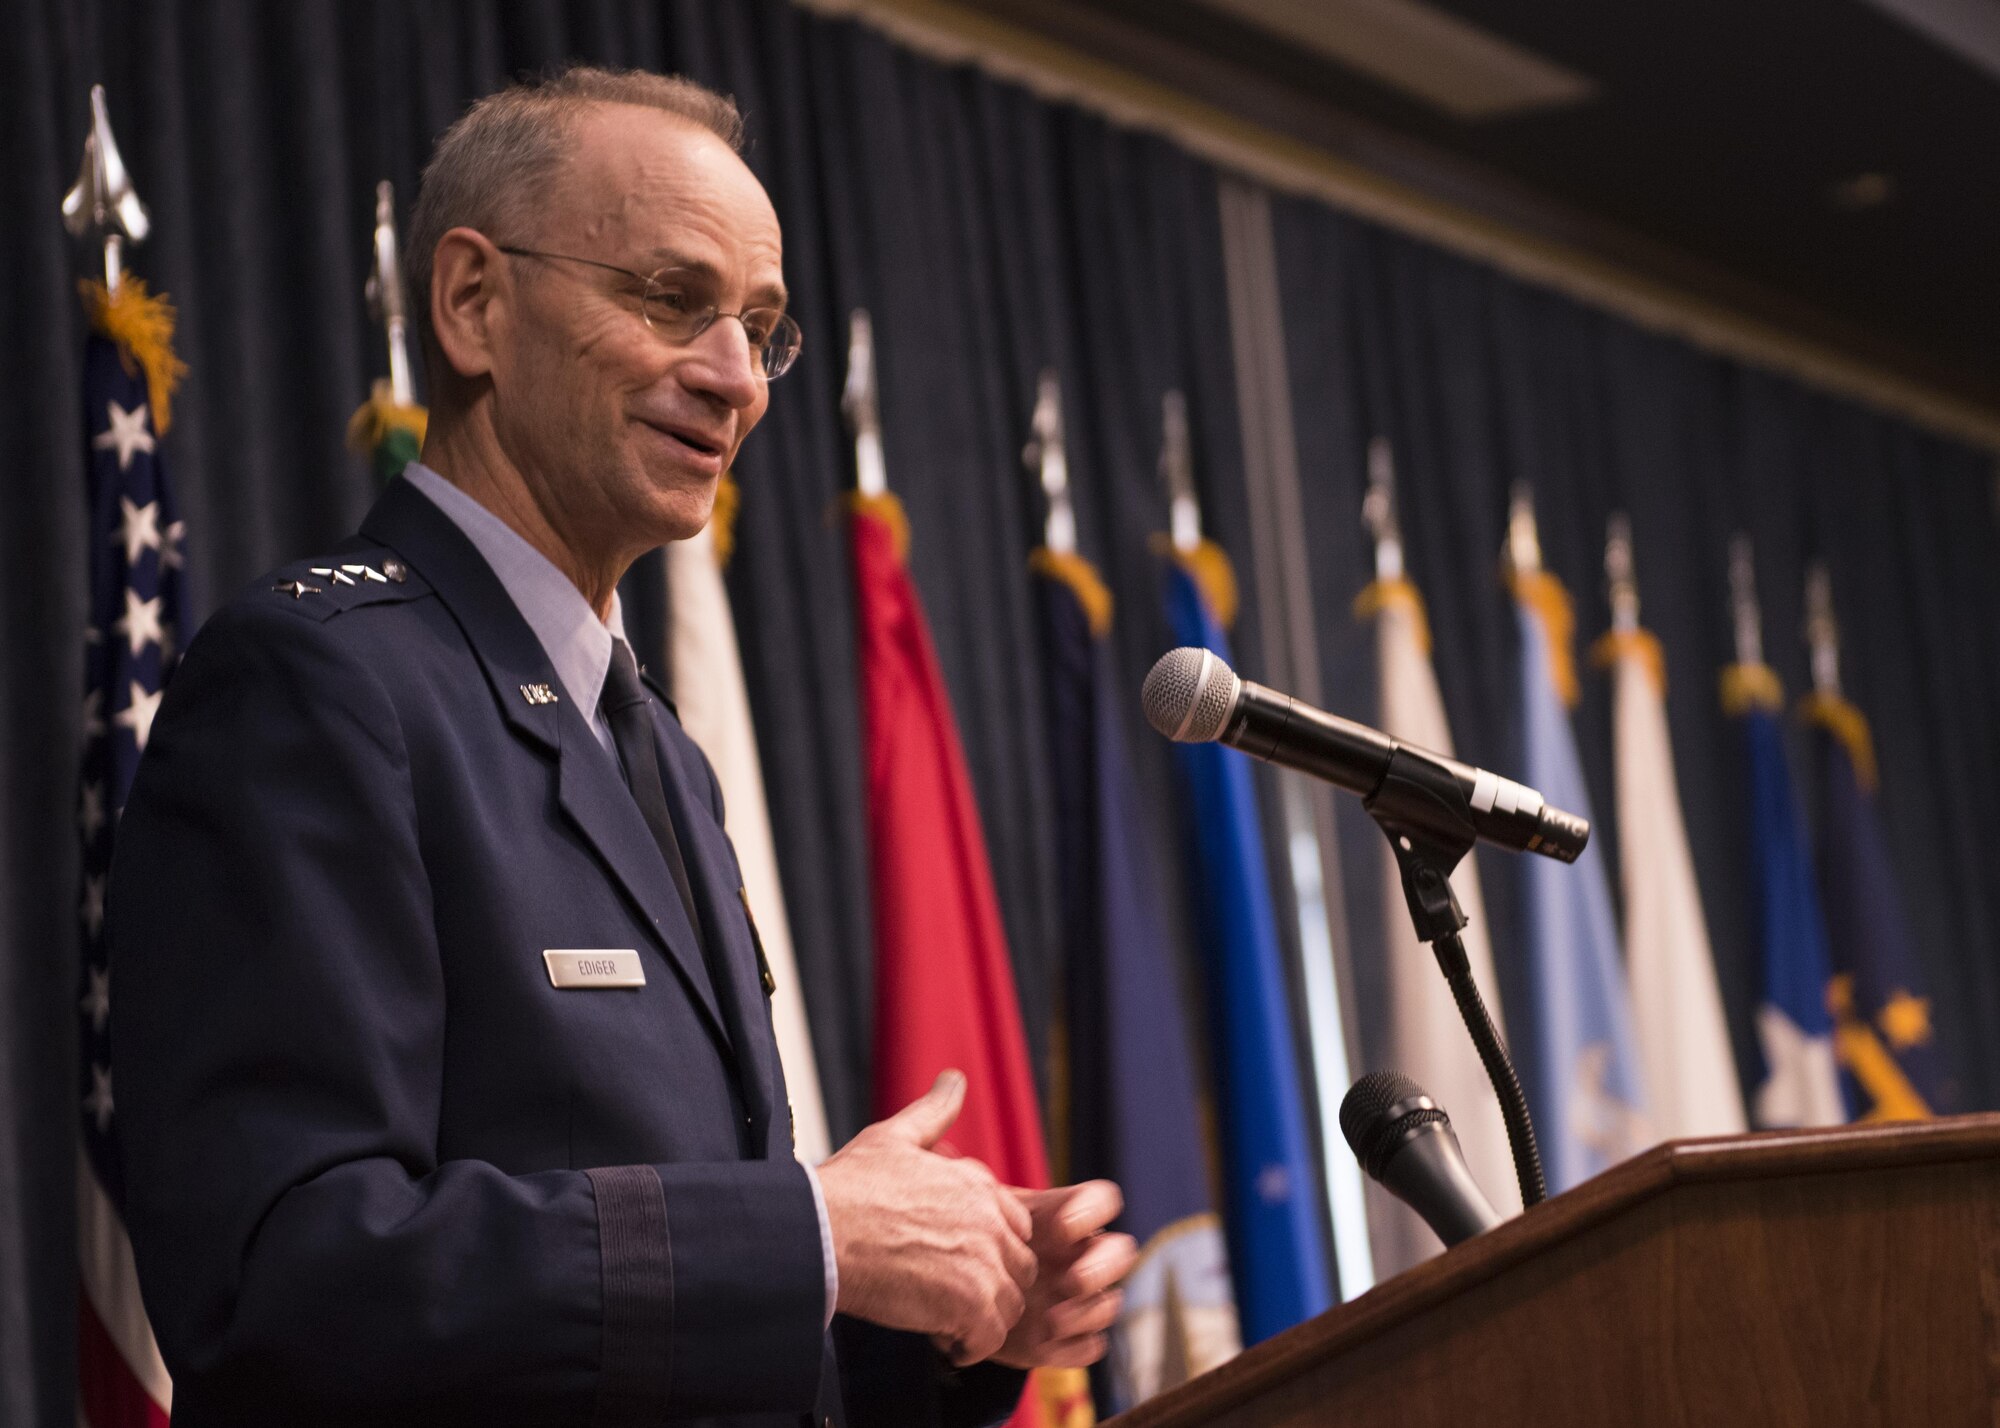 Lt. Gen. Mark Ediger, the Air Force Surgeon General, offers thanks and congratulations for the dedication and efforts of the 92d Medical Group during a MHS GENESIS "go-live" recognition ceremony at Fairchild Air Force Base, Wash, Feb. 15, 2017. Fairchild AFB was the pilot base for the development and implementation of the new, Defense Department-wide health system. (U.S. Air Force photo by Airman 1st Class Ryan Lackey)